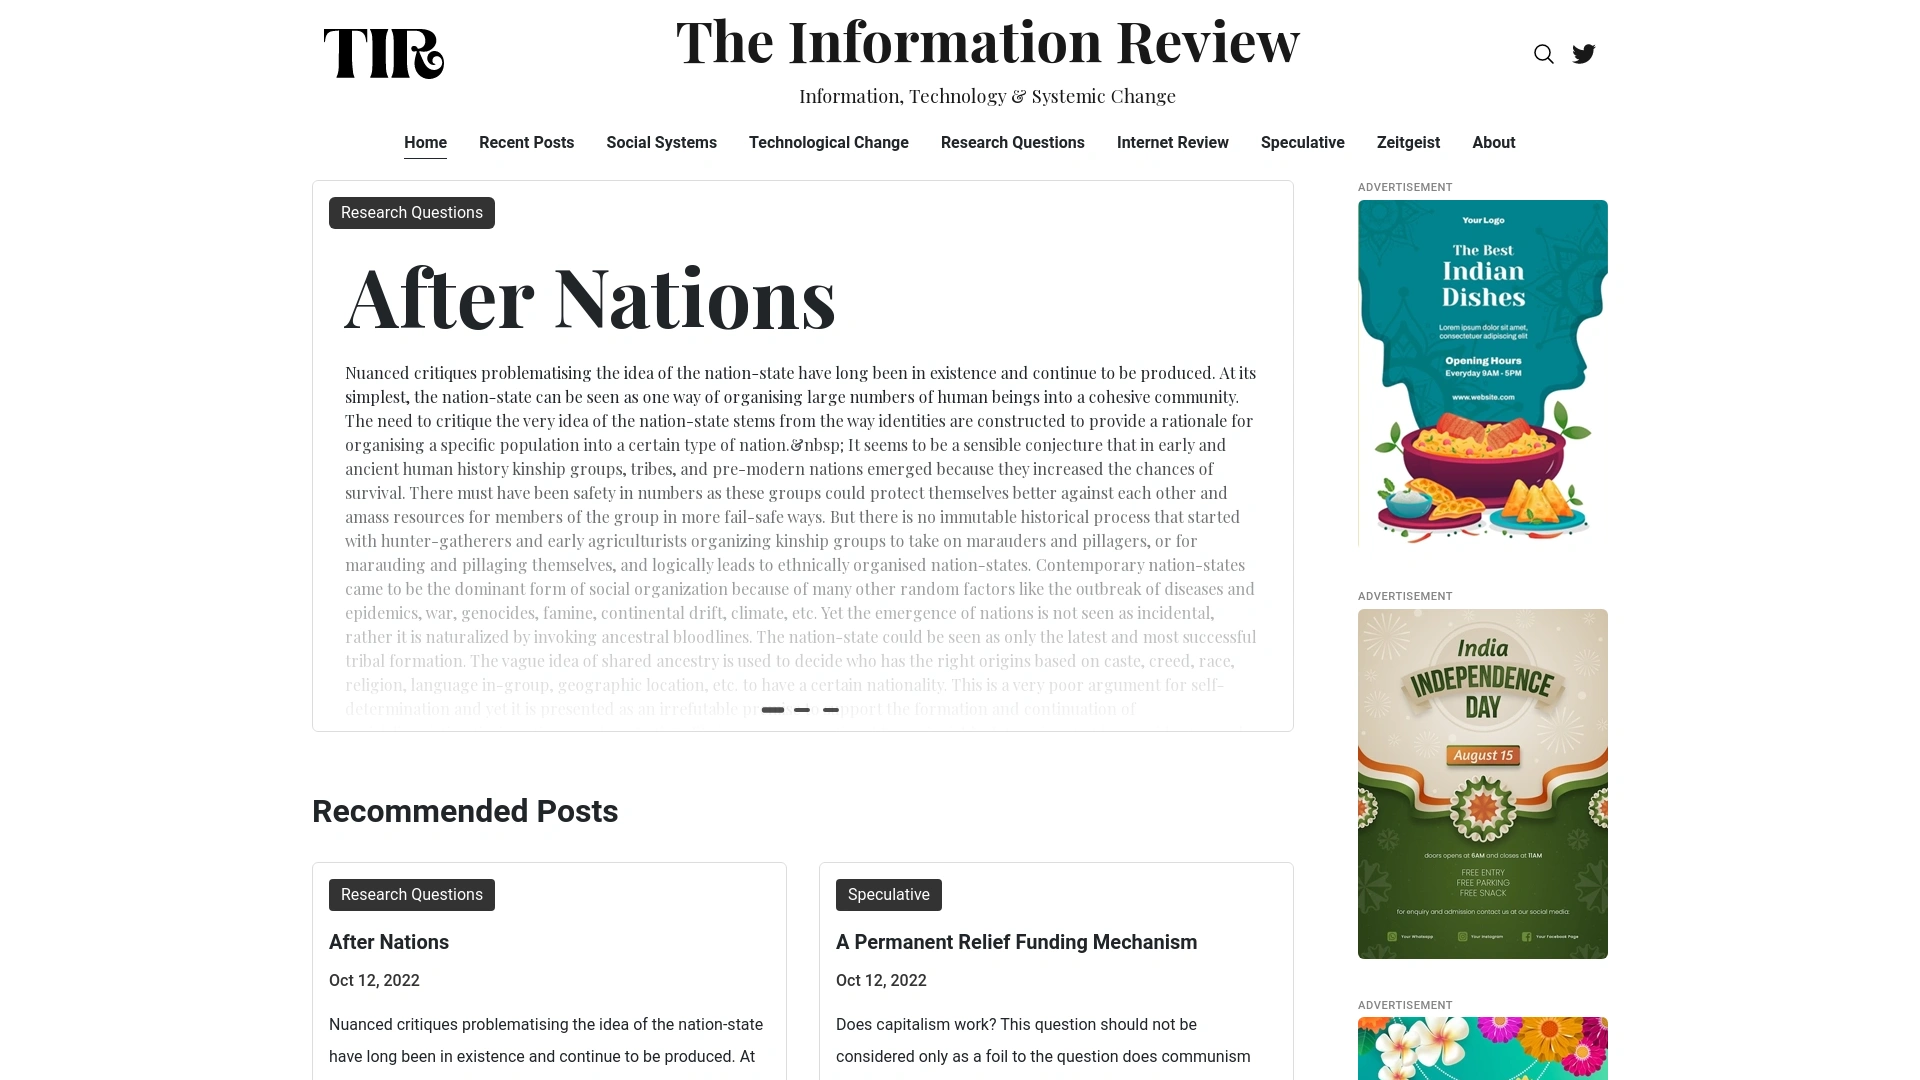 The Information Review